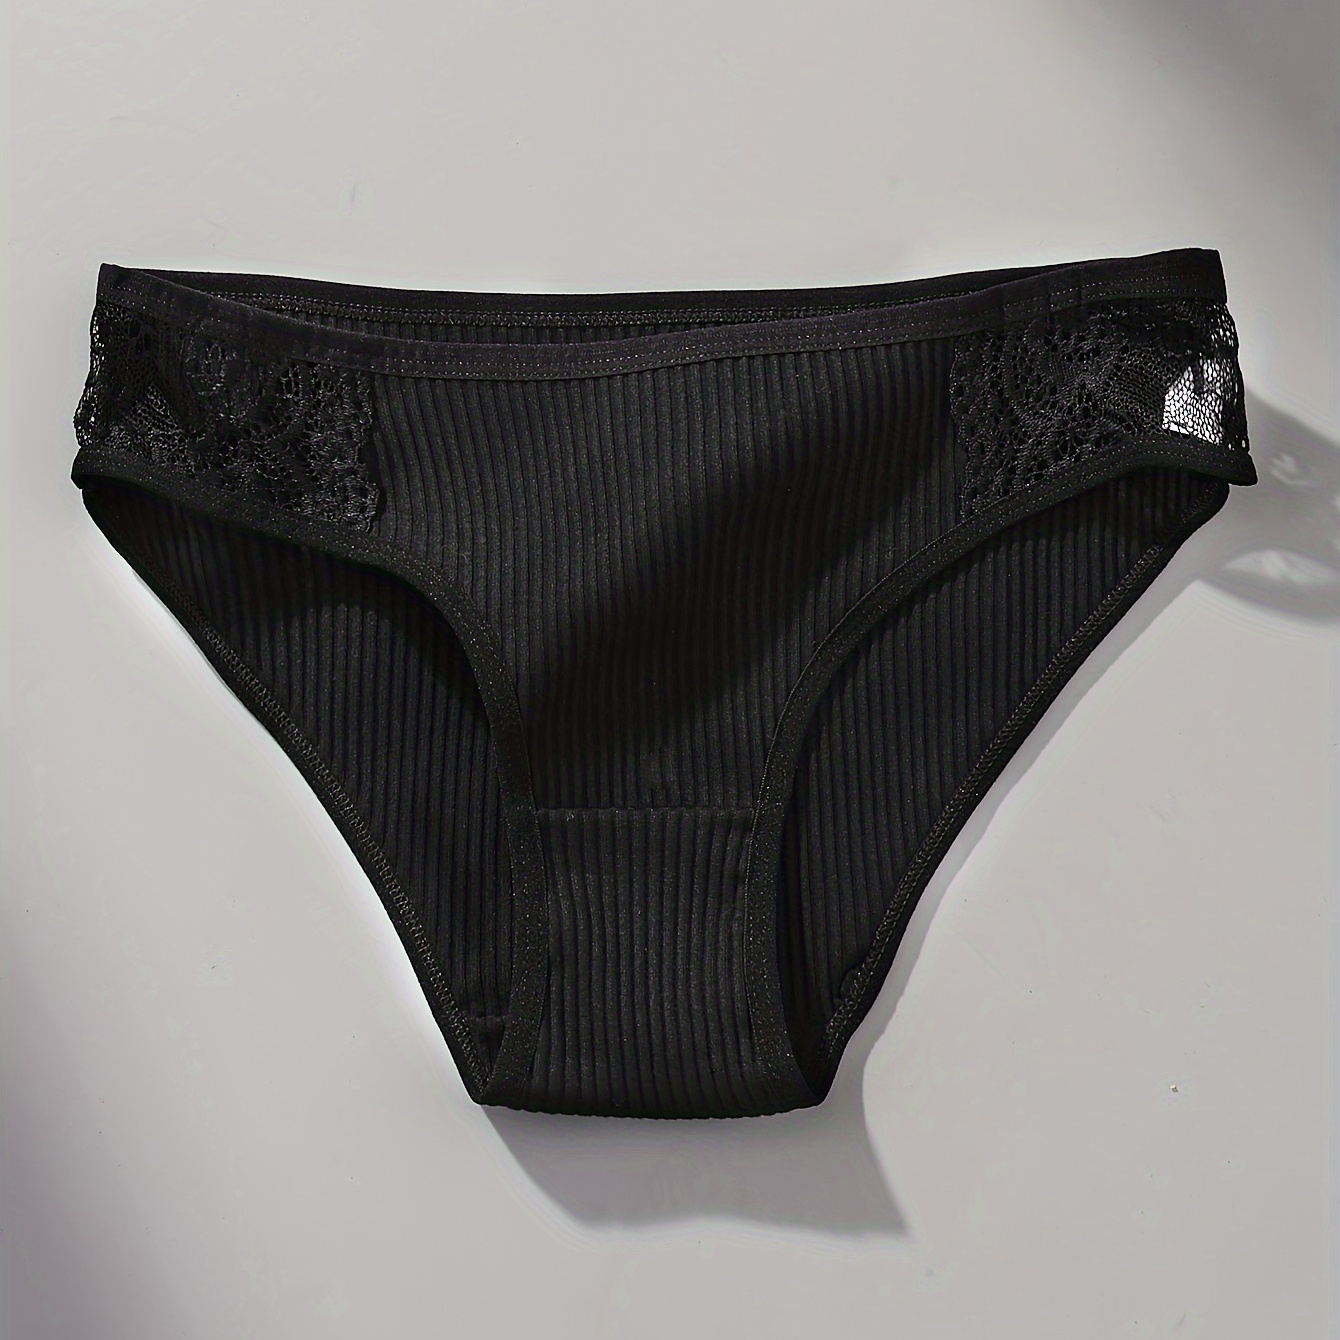 

Contrast Lace Ribbed Briefs, Comfy & Breathable Intimate Panties, Women's Lingerie & Underwear